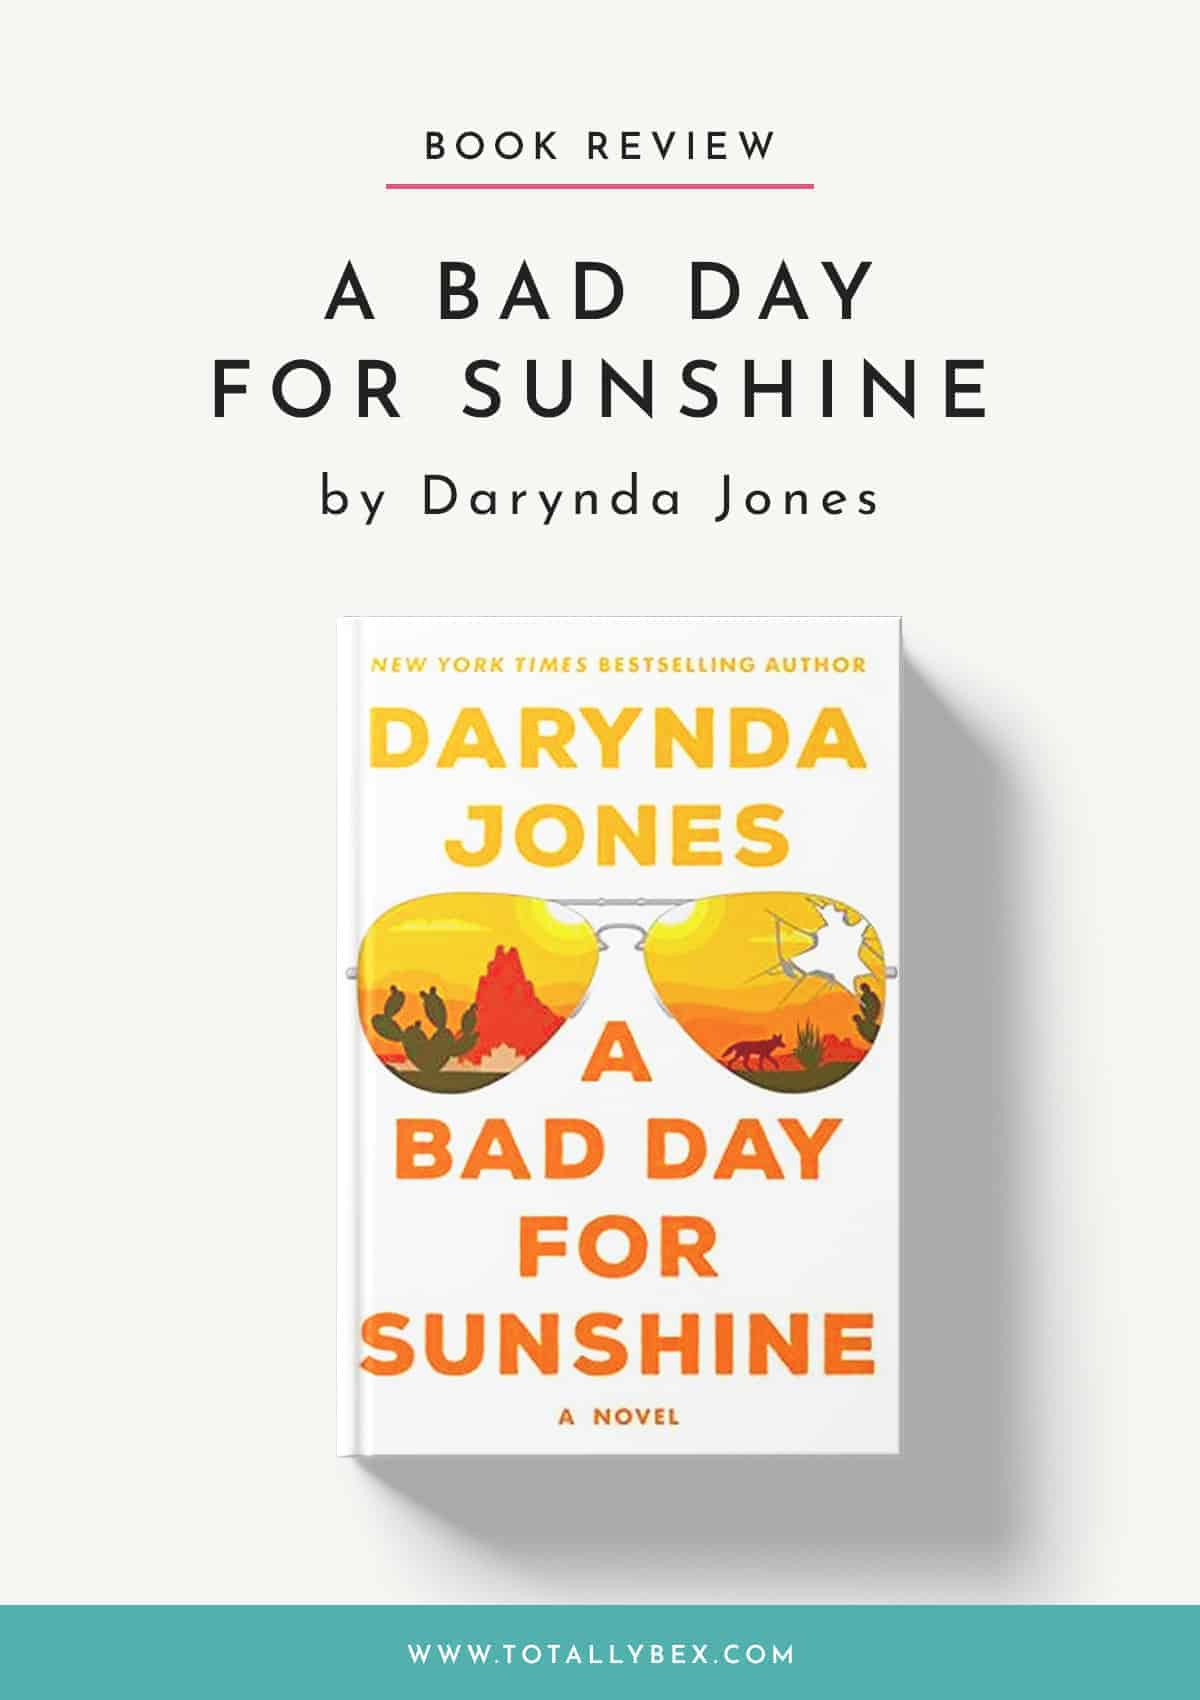 A Bad Day for Sunshine by Darynda Jones is the witty and suspenseful first book in the Sunshine Vicram series with quirky characters and sassy sarcasm galore!